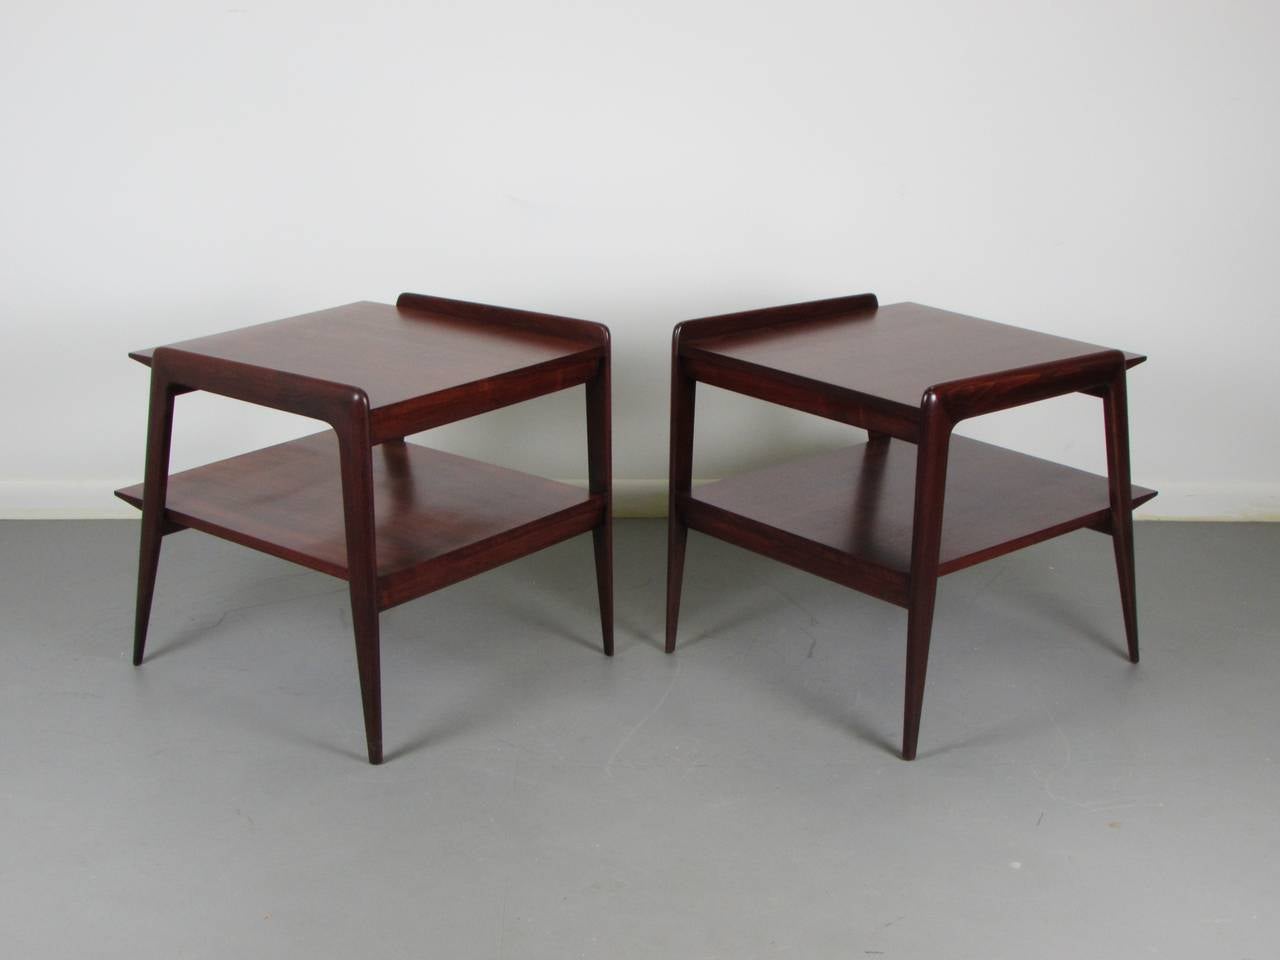 Italian Rare and Wicked Pair of End Tables by M. Singer & Sons, Attributed to Gio Ponti